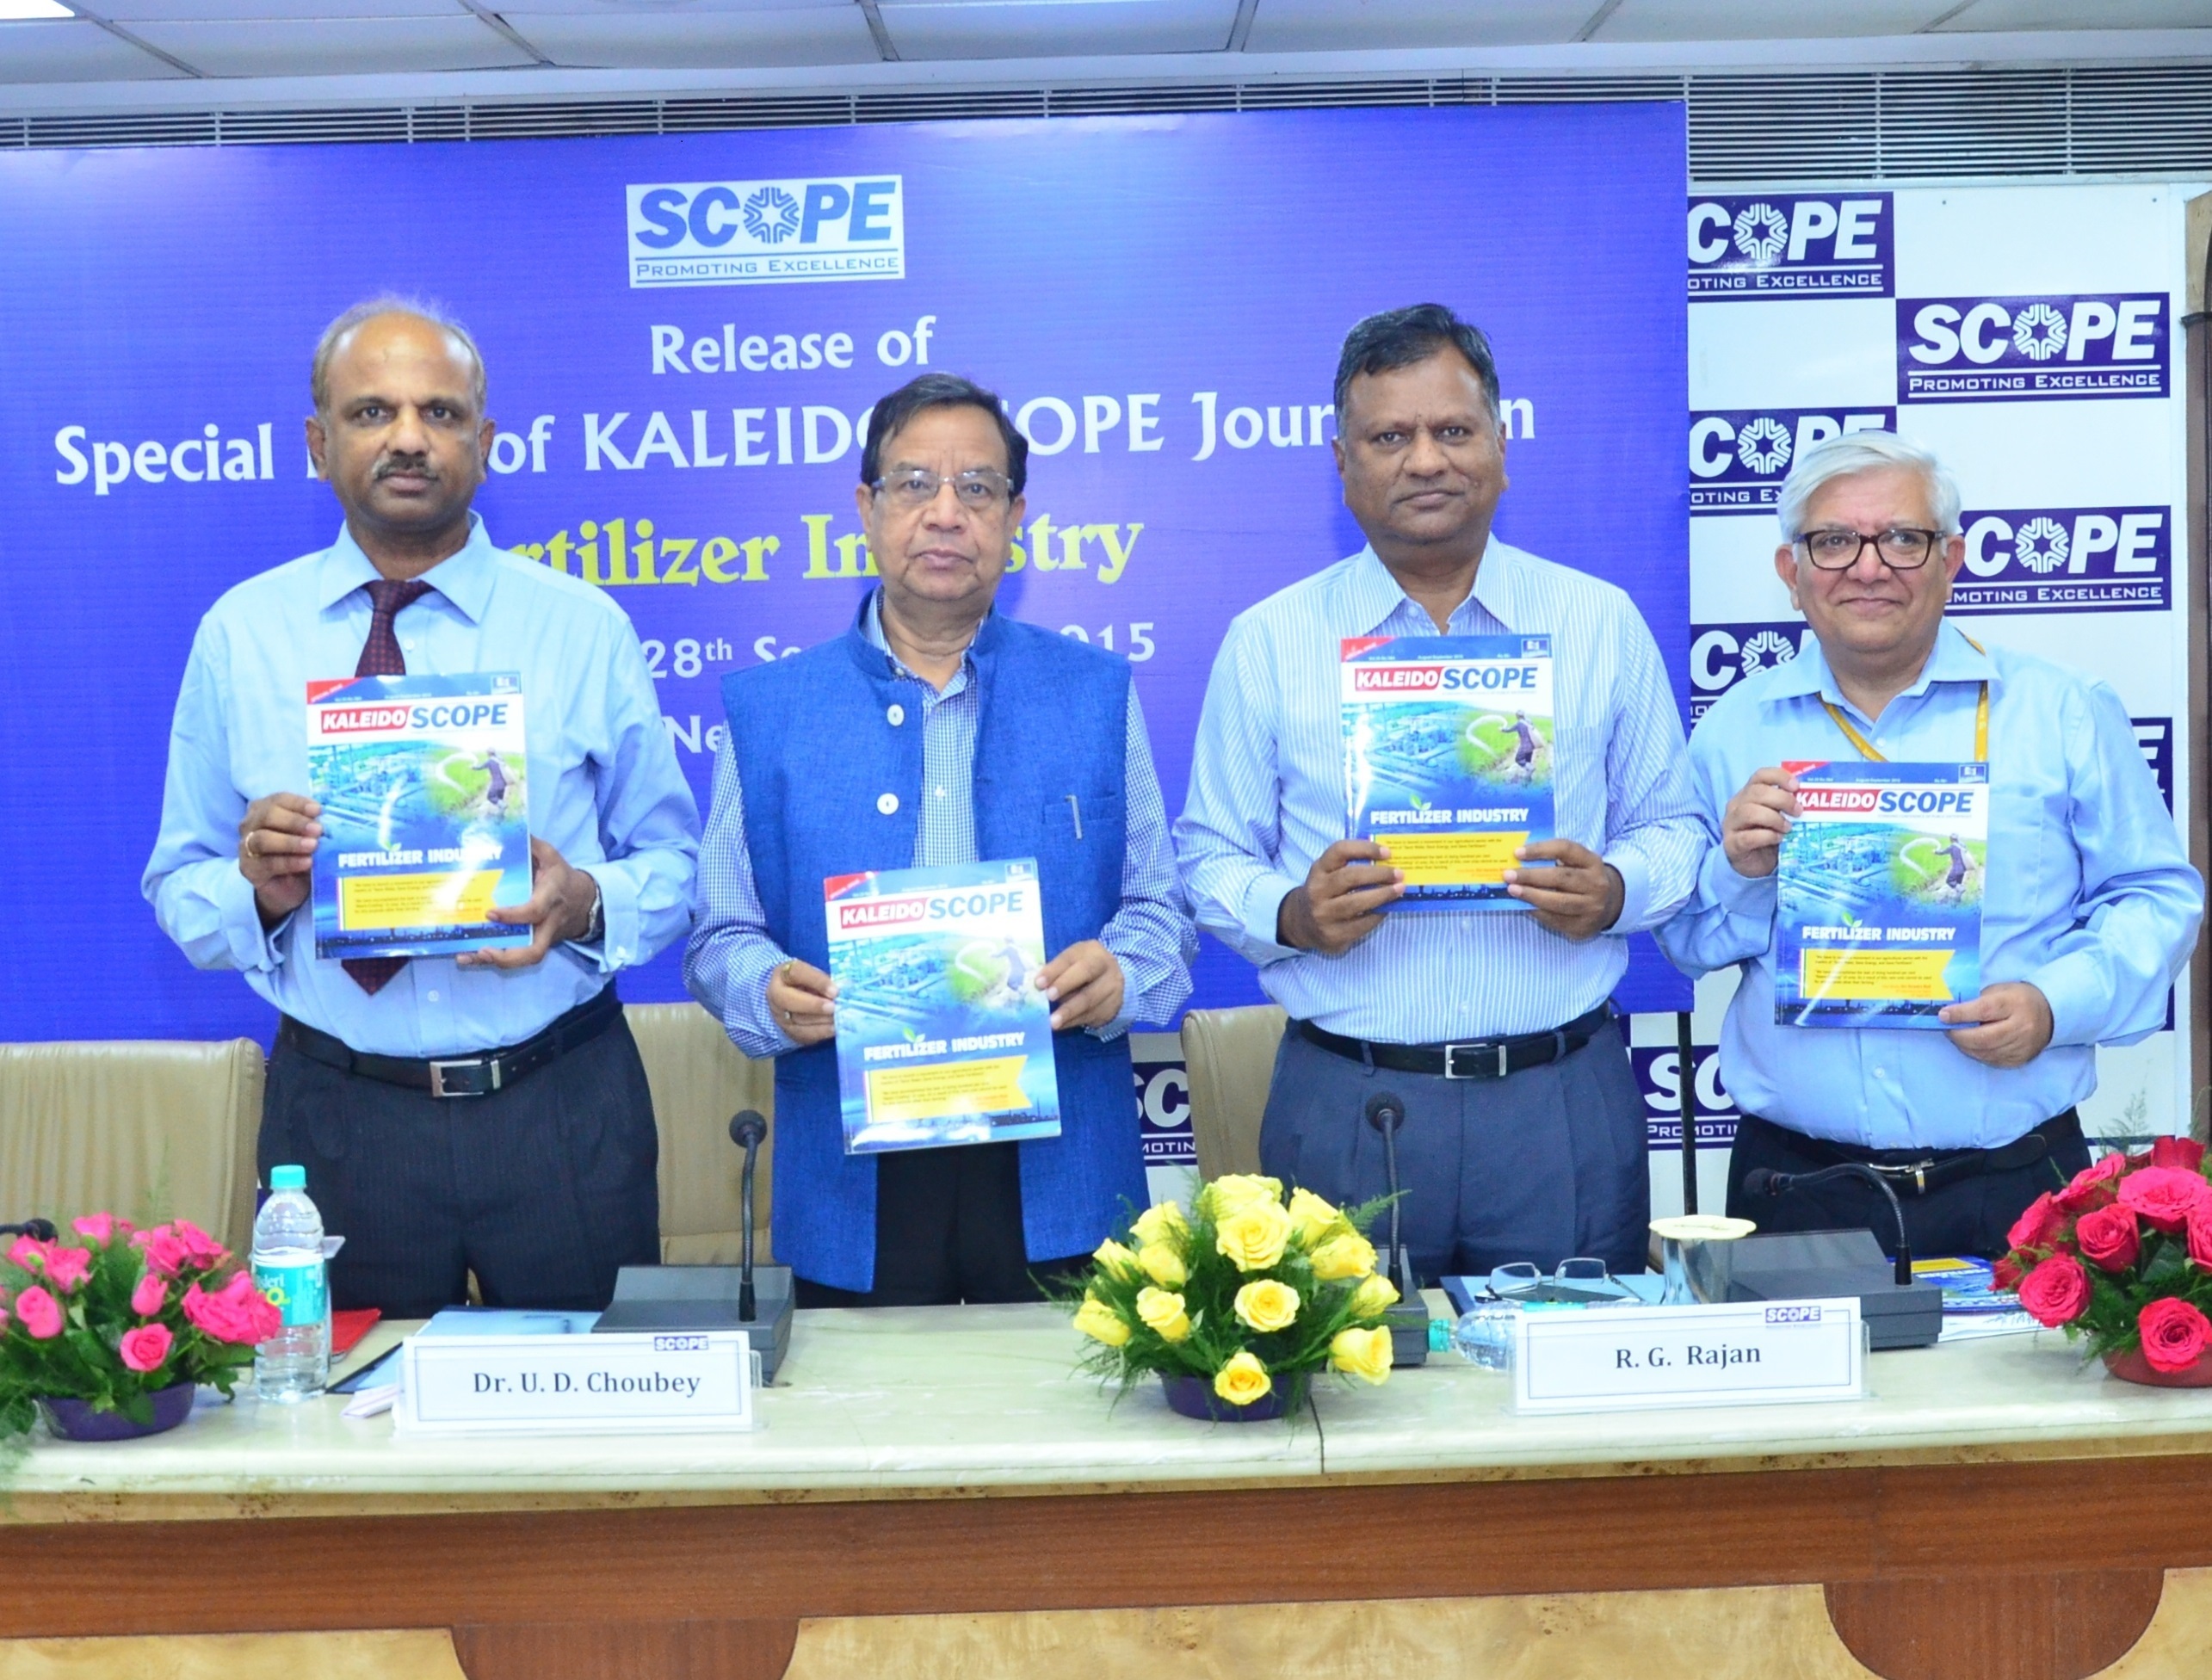 Shri. R.G.Rajan CMD RCF and Chairman SCOPE released SCOPE’s Special Issue on Fertilizer Sector